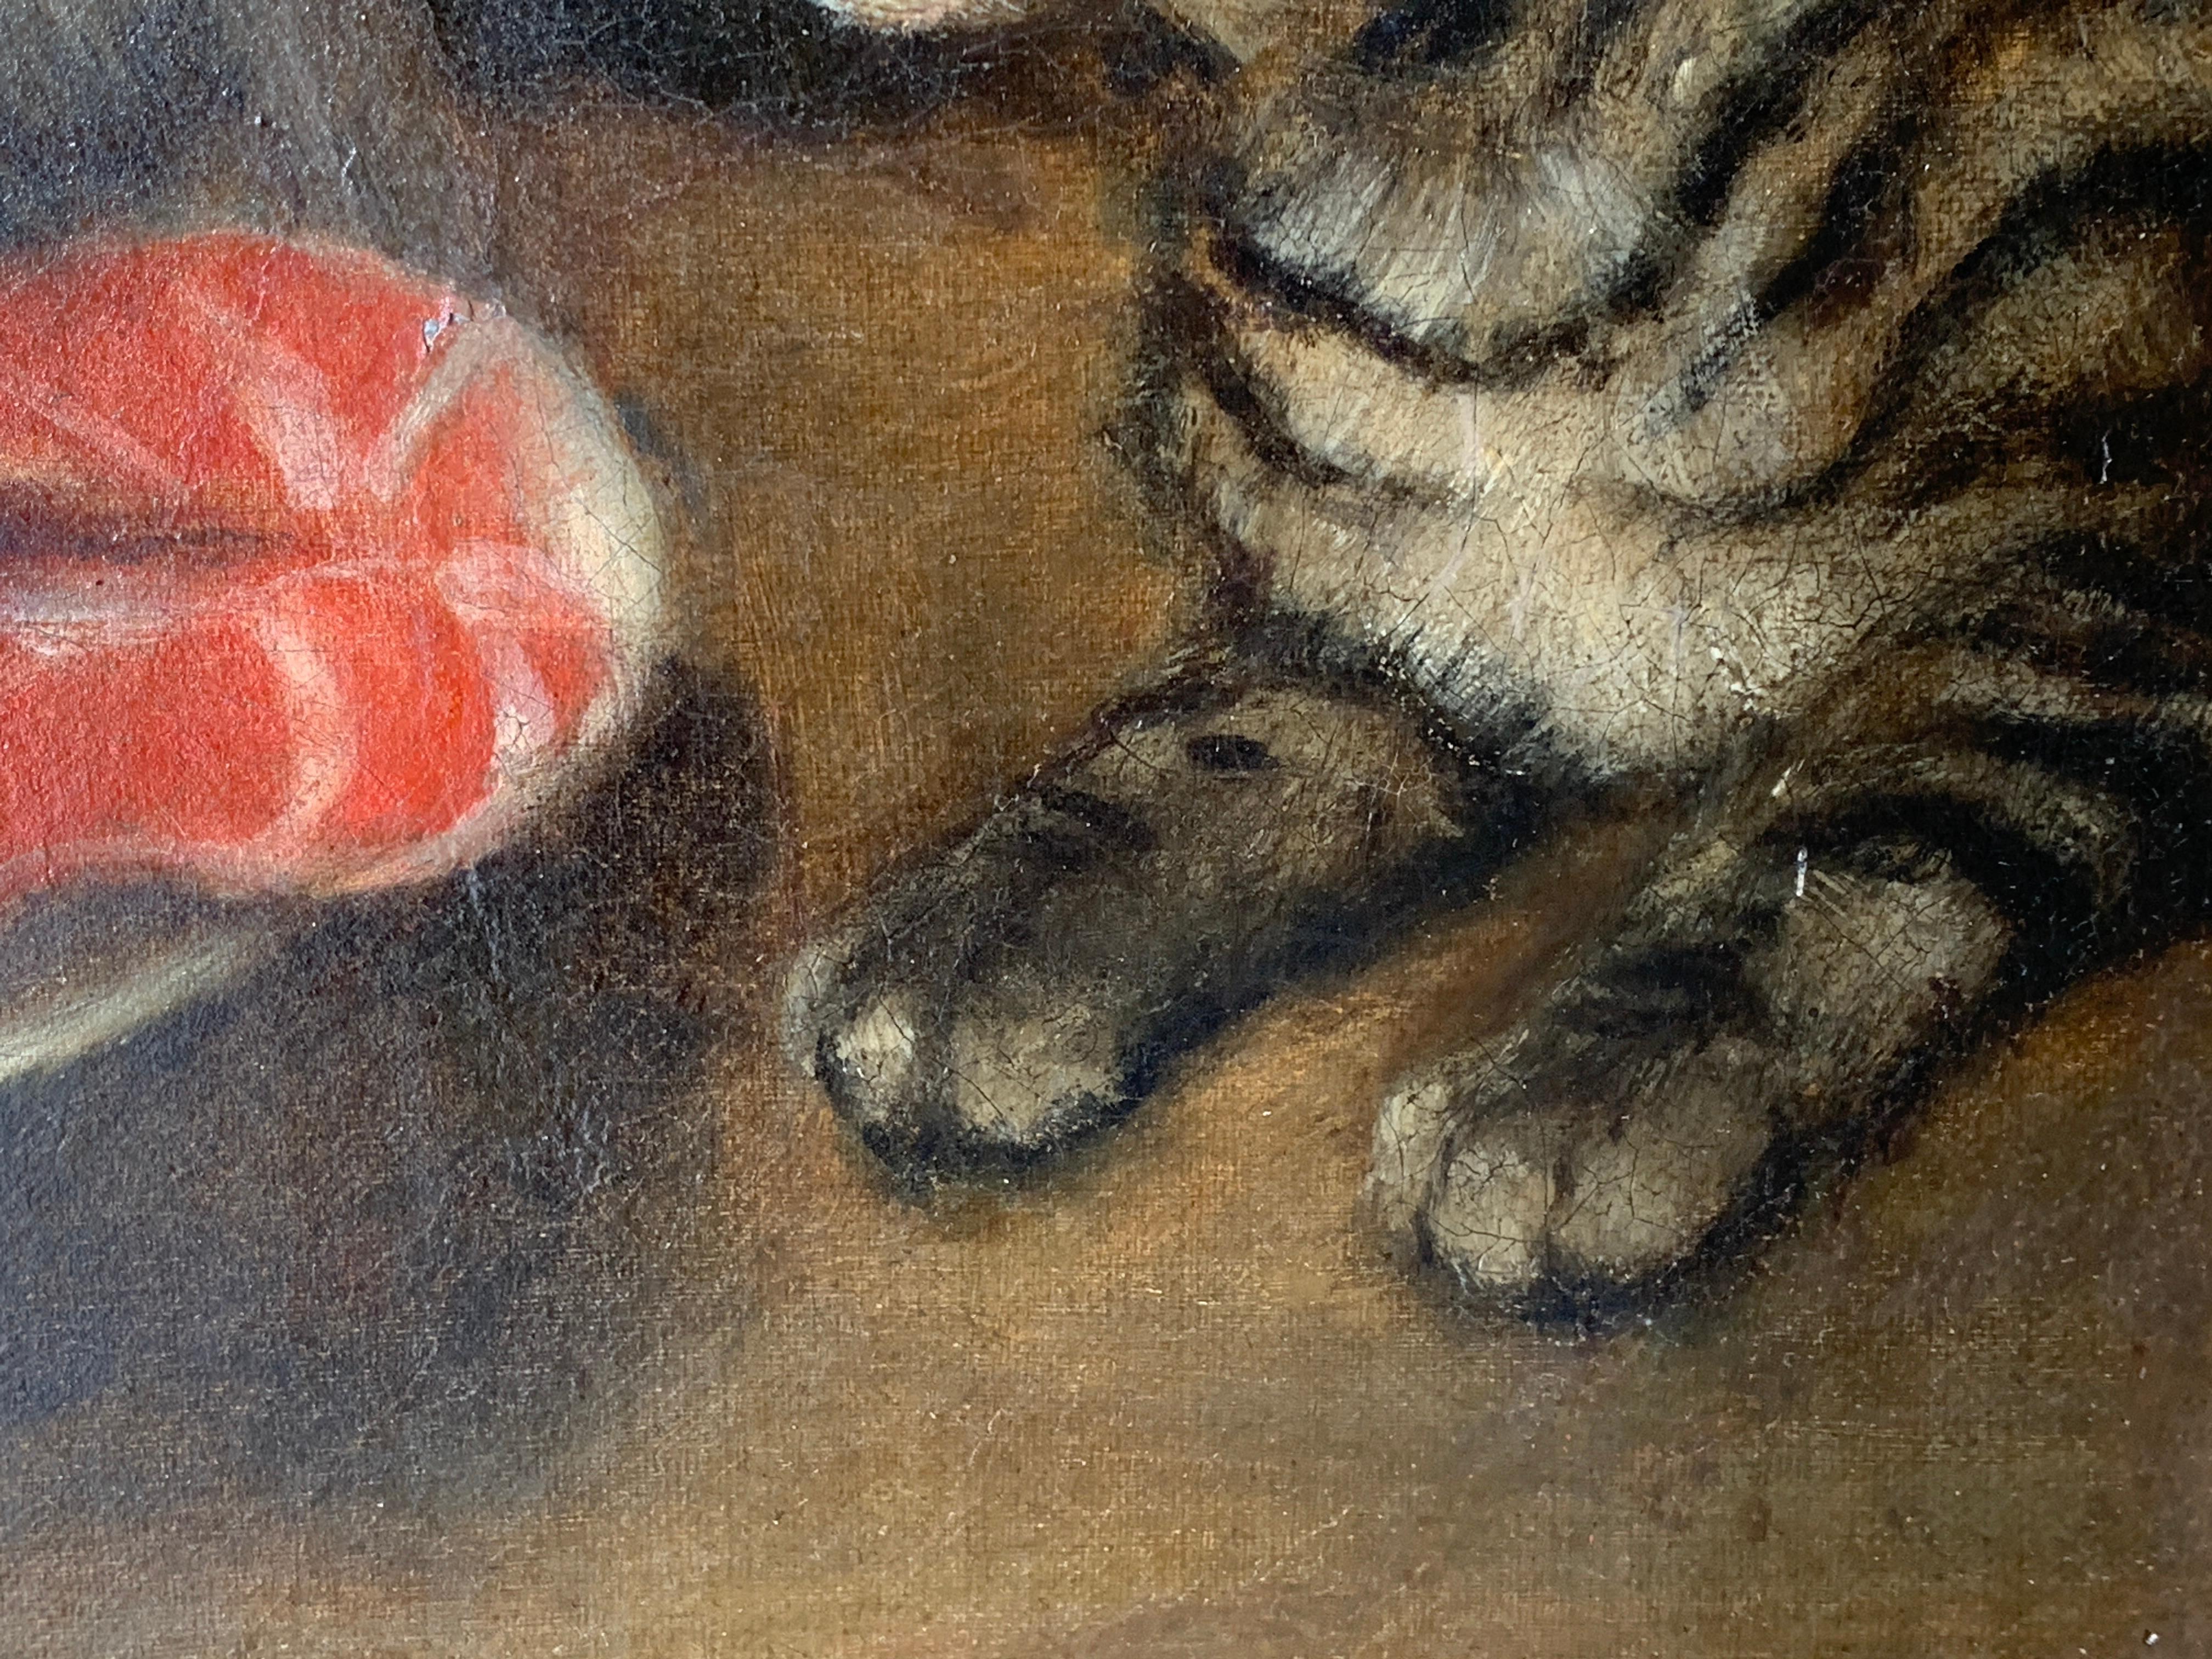 English Antique mid-19th-century oil on canvas of a cat looking at a crab and side of Salmon.

Unique Folk art painting of amazing quality and decorative appeal.

Engish folk art from this period is quite rare and such a composition as this